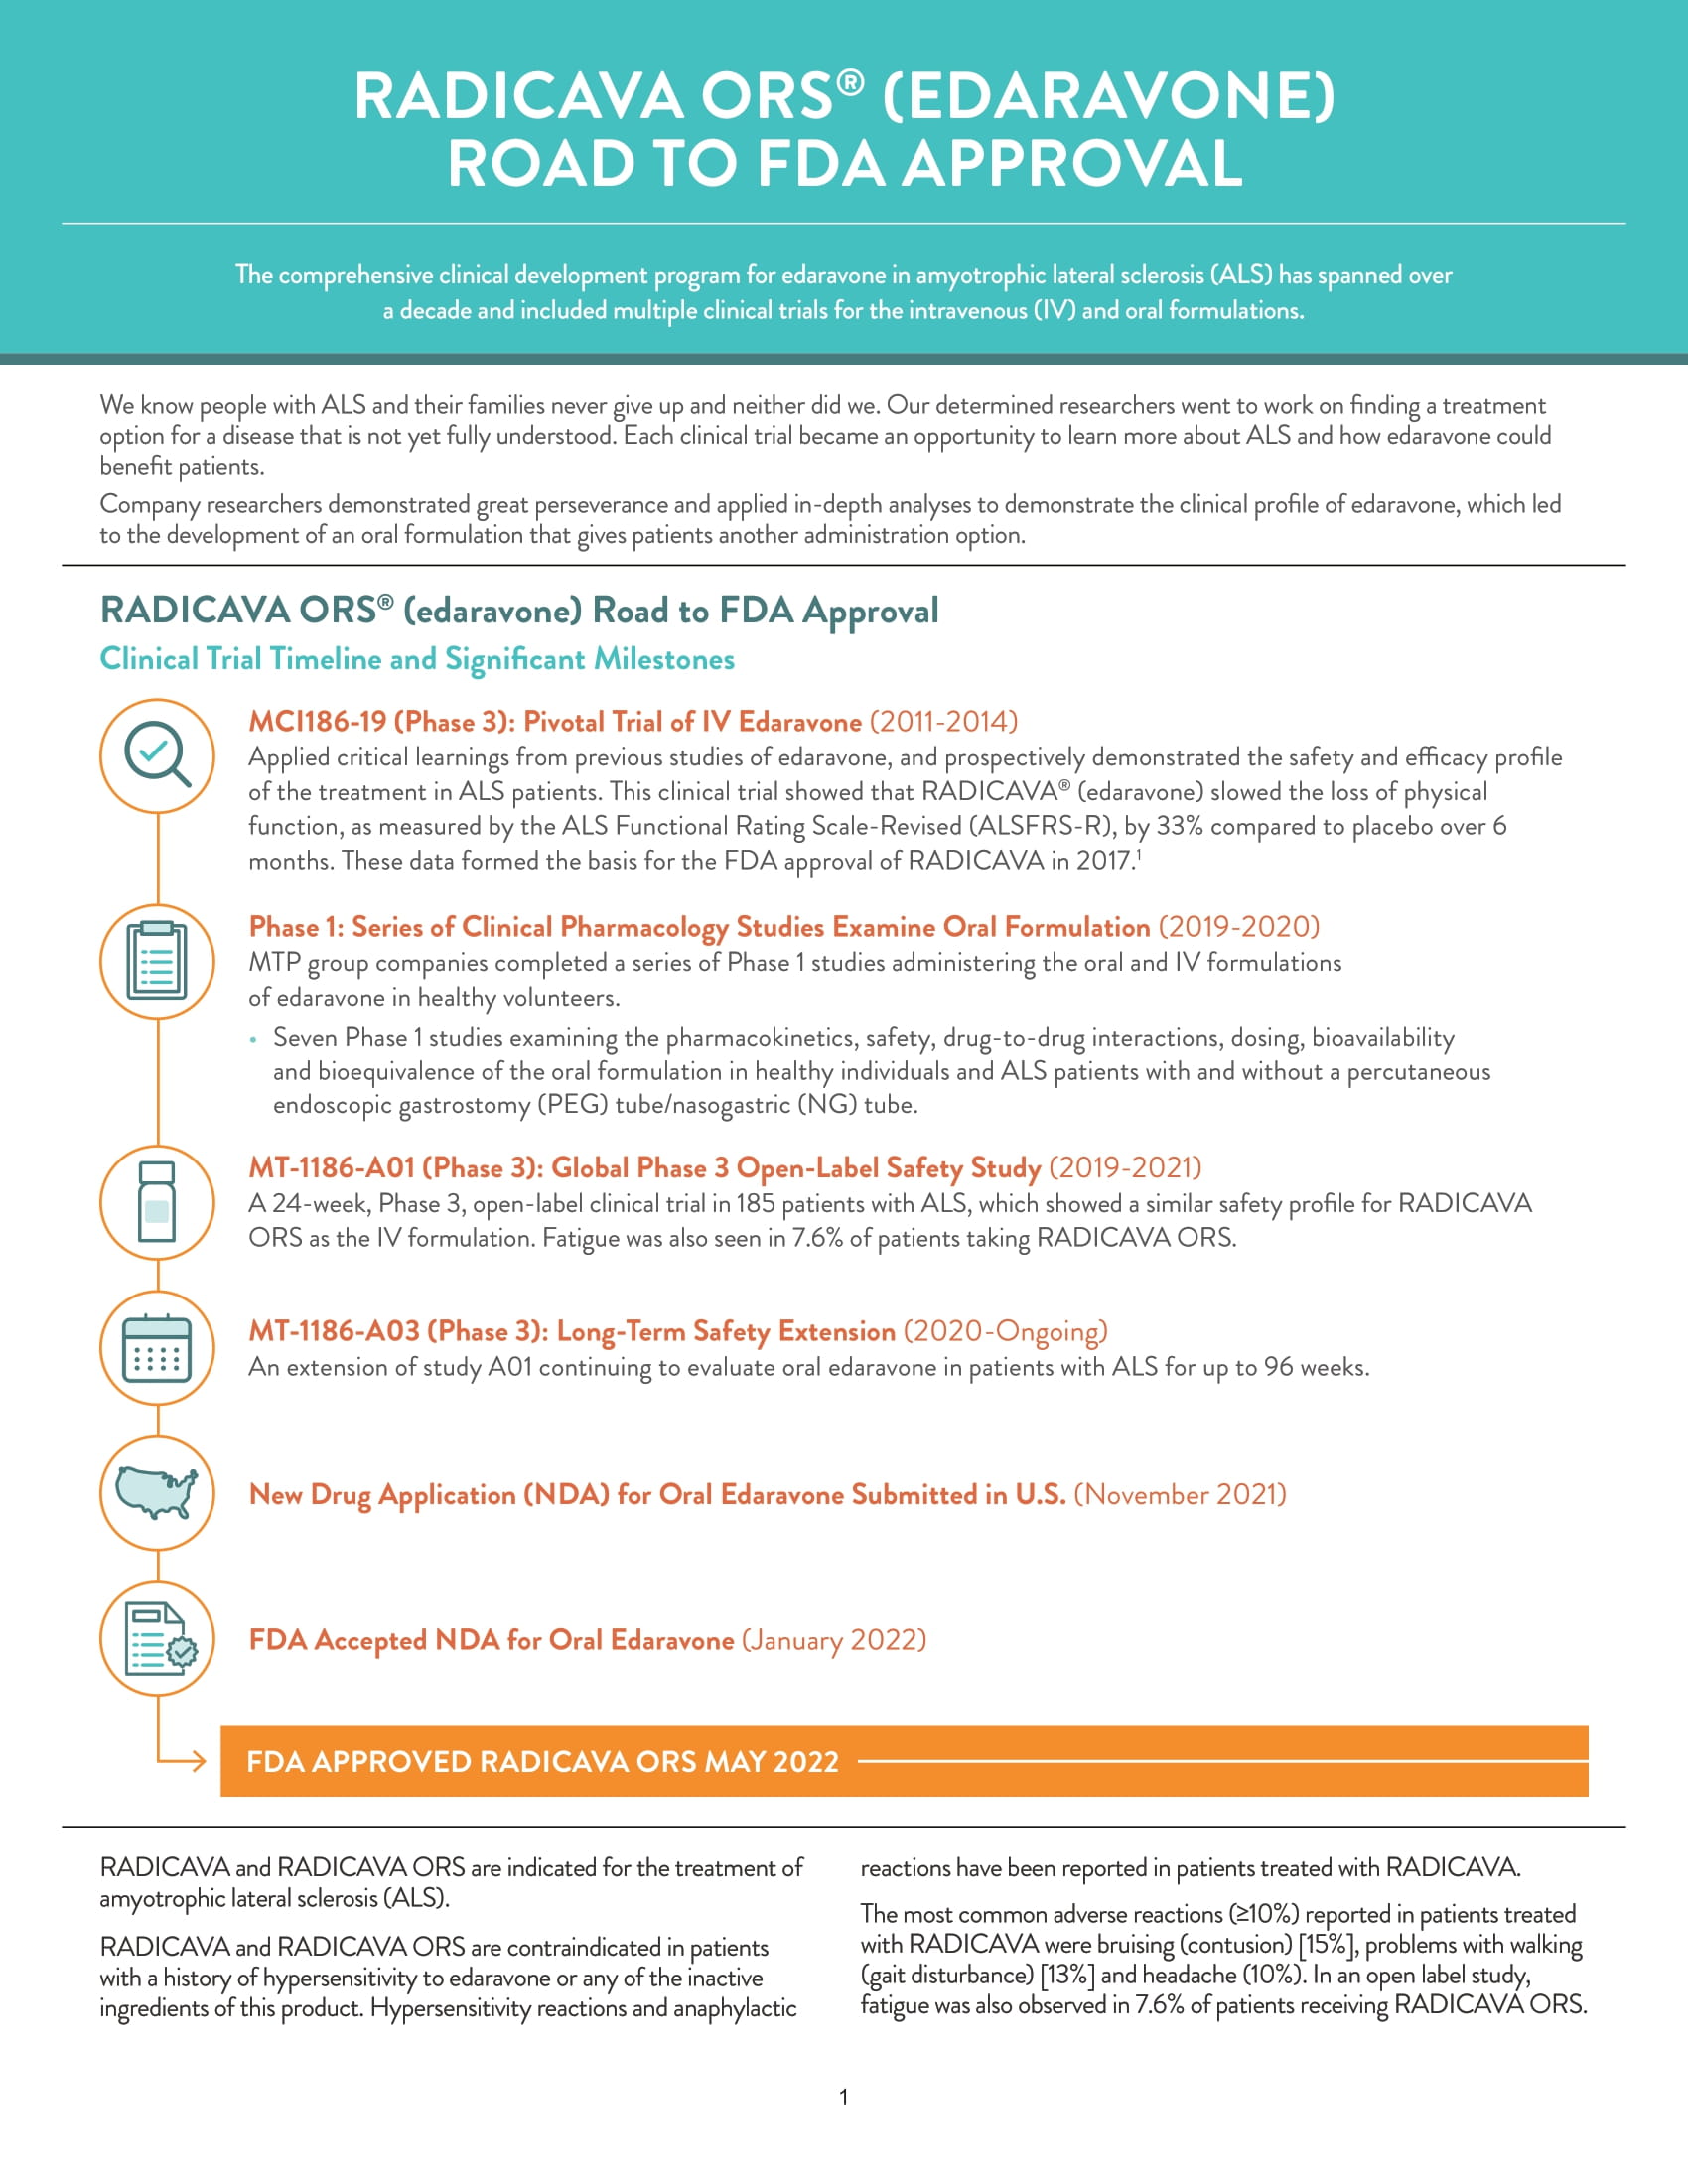 RADICAVA ORS Road to Approval Fact Sheet